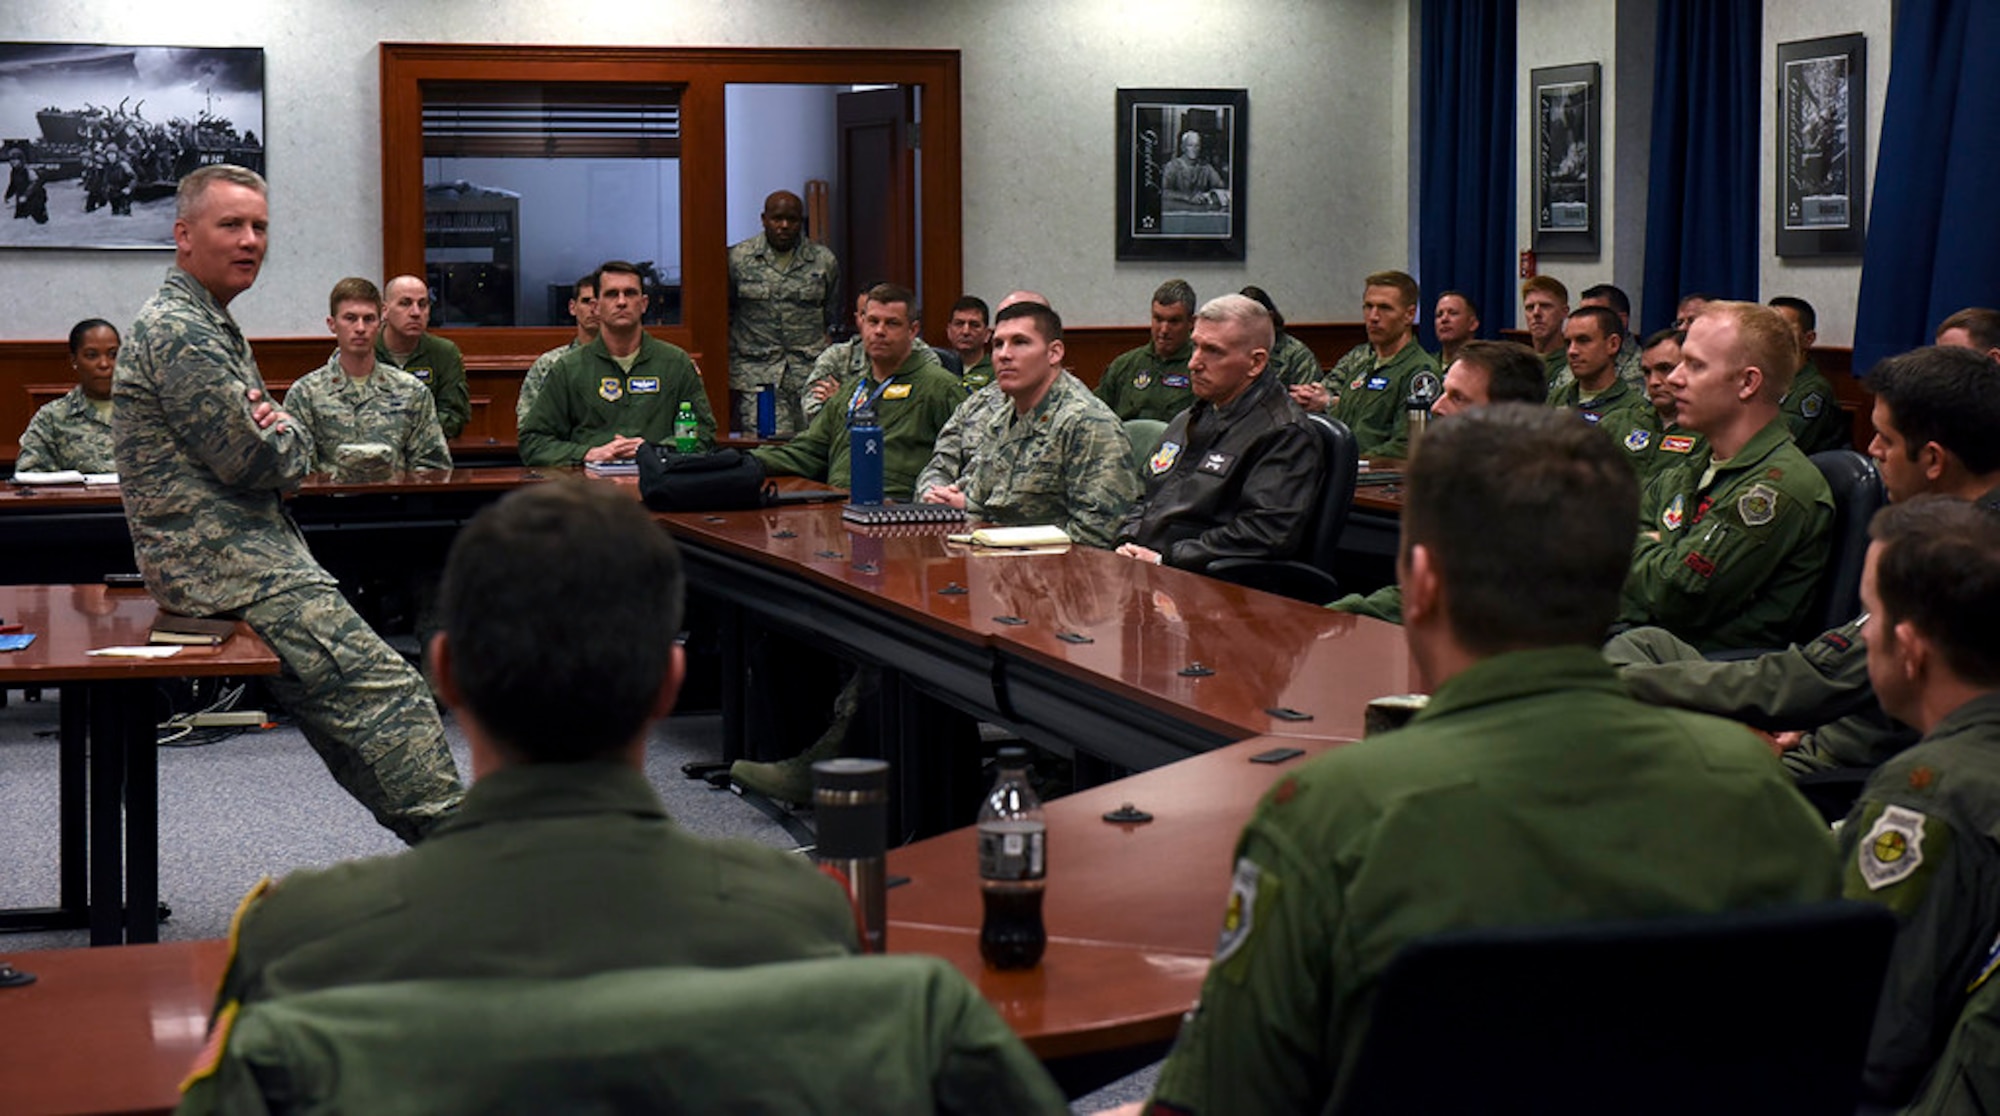 180409-N-VL575-038 NEWPORT, R.I. (April 9, 2018) Air Force Maj. Gen. James A. Jacobson, commander, Air Force District of Washington, visits with Air Force students, staff and faculty assigned to U.S. Naval War College. During his visit, Jacobson met with Air Force personnel to discuss current events as well as answer questions.  (U.S. Navy photo by Caitlin Blanchard/released)